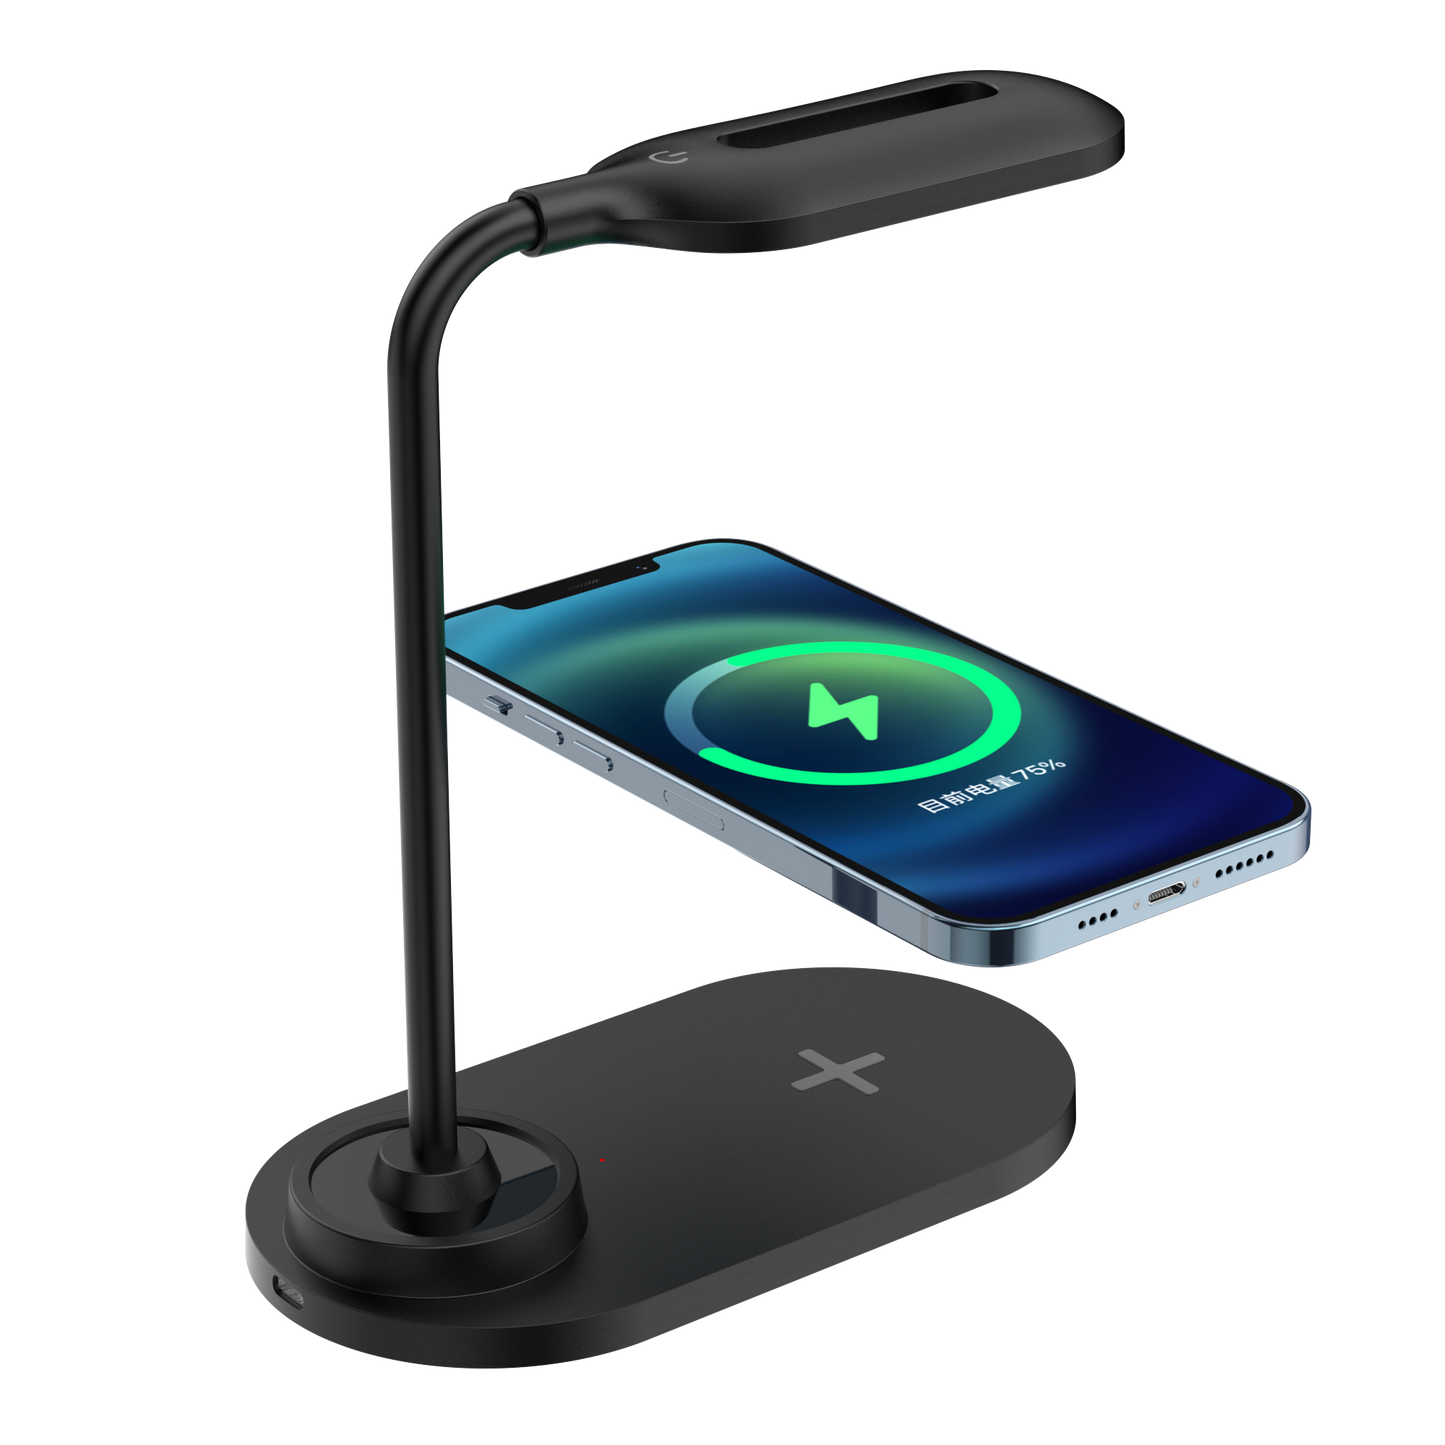 30W Wireless Charging LED Table Lamp. Fast Wireless Charger